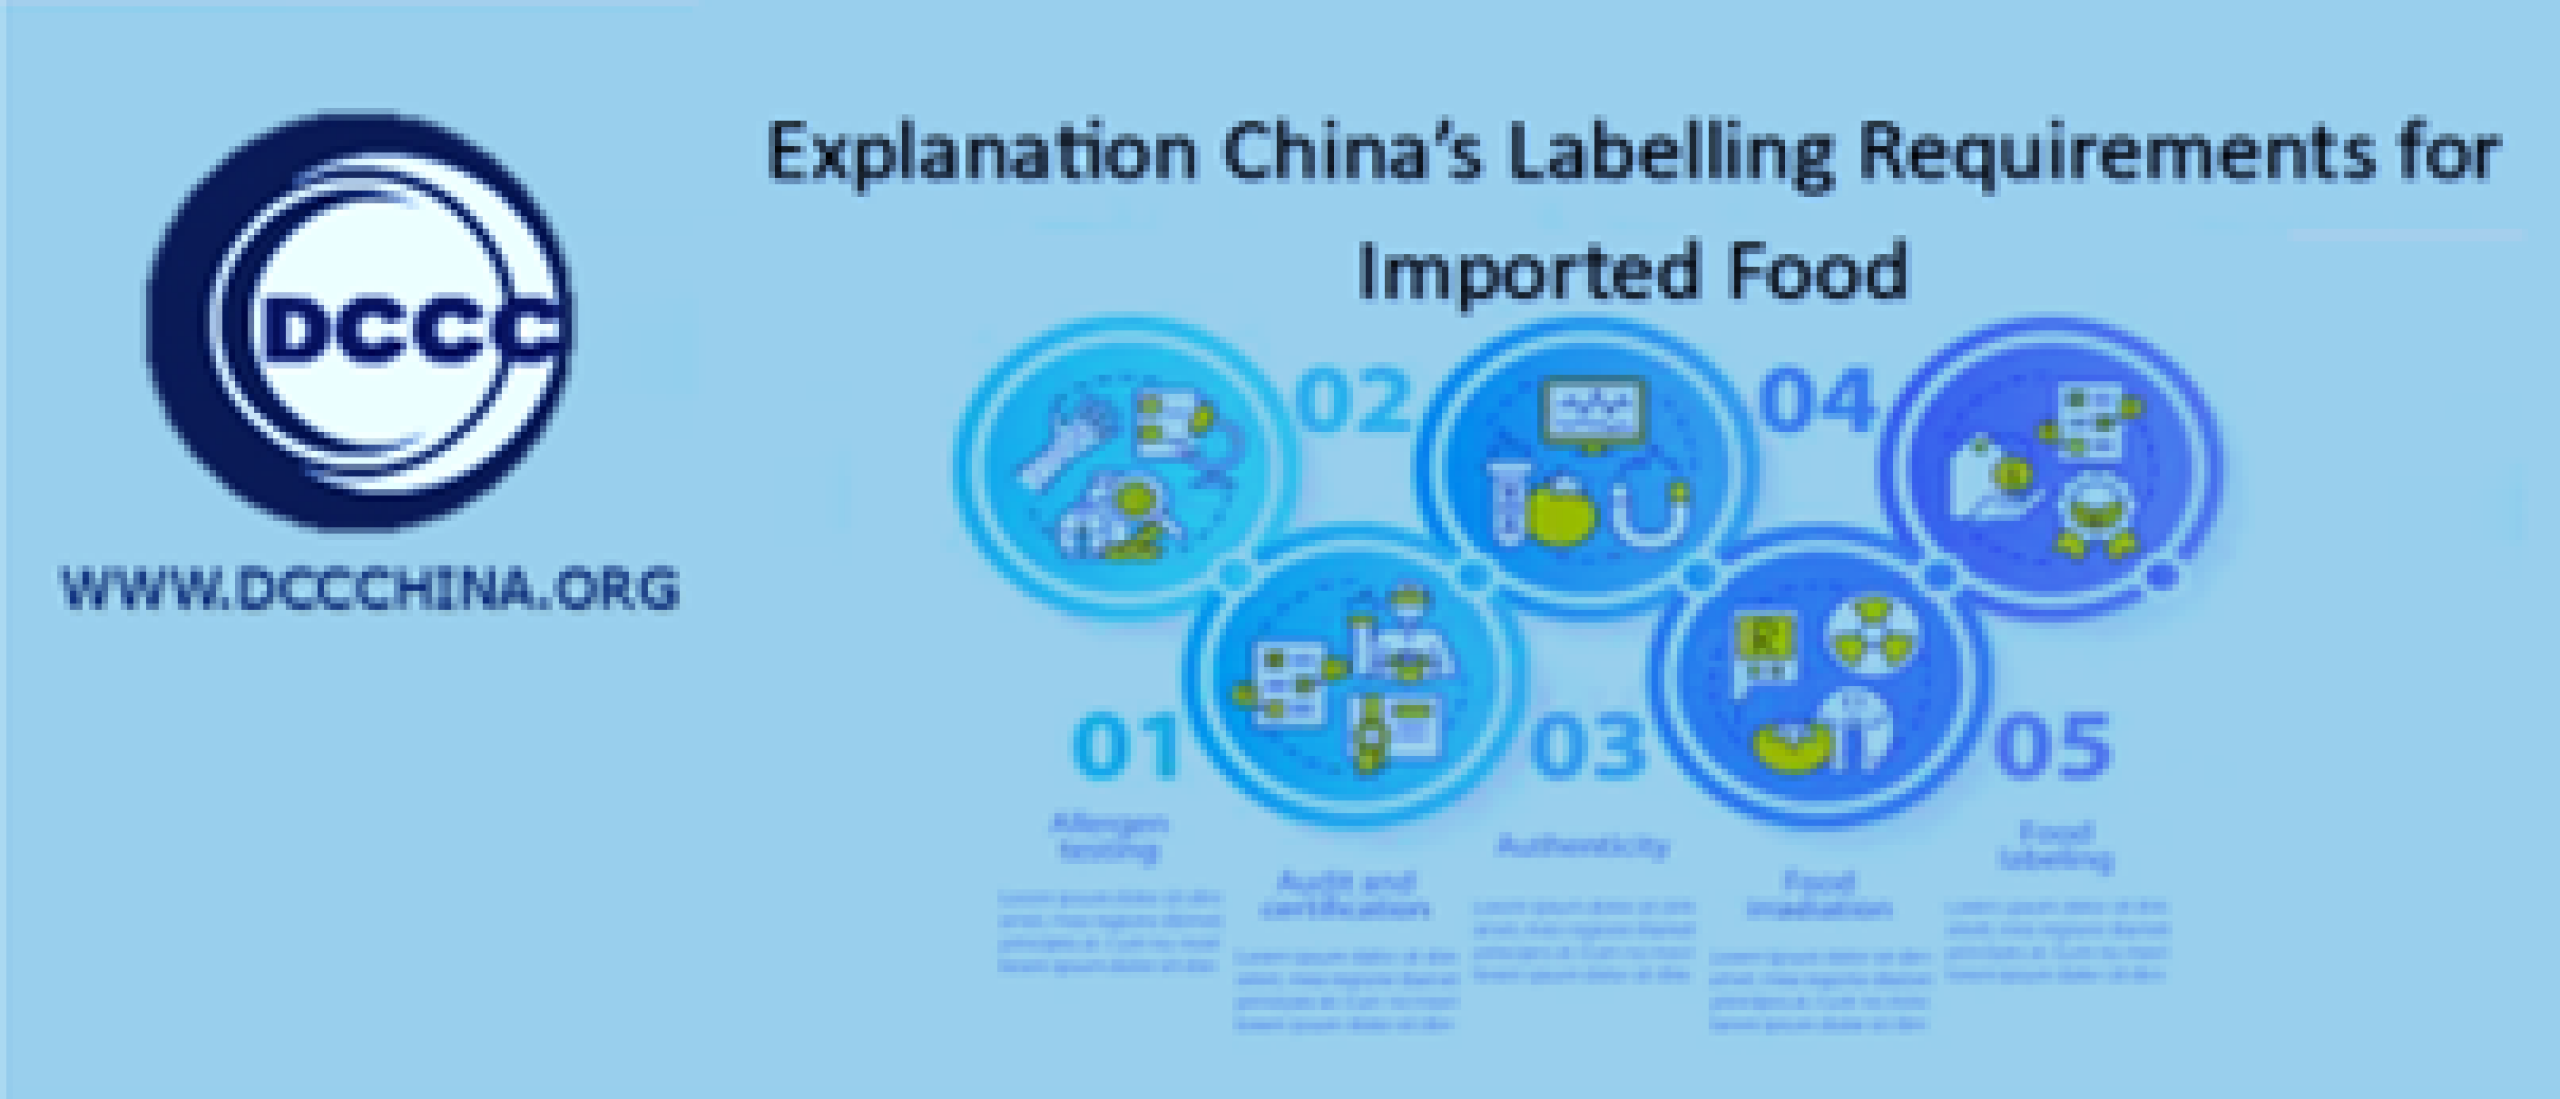 Explanation China’s labelling requirements for imported food - guide importing food products to China